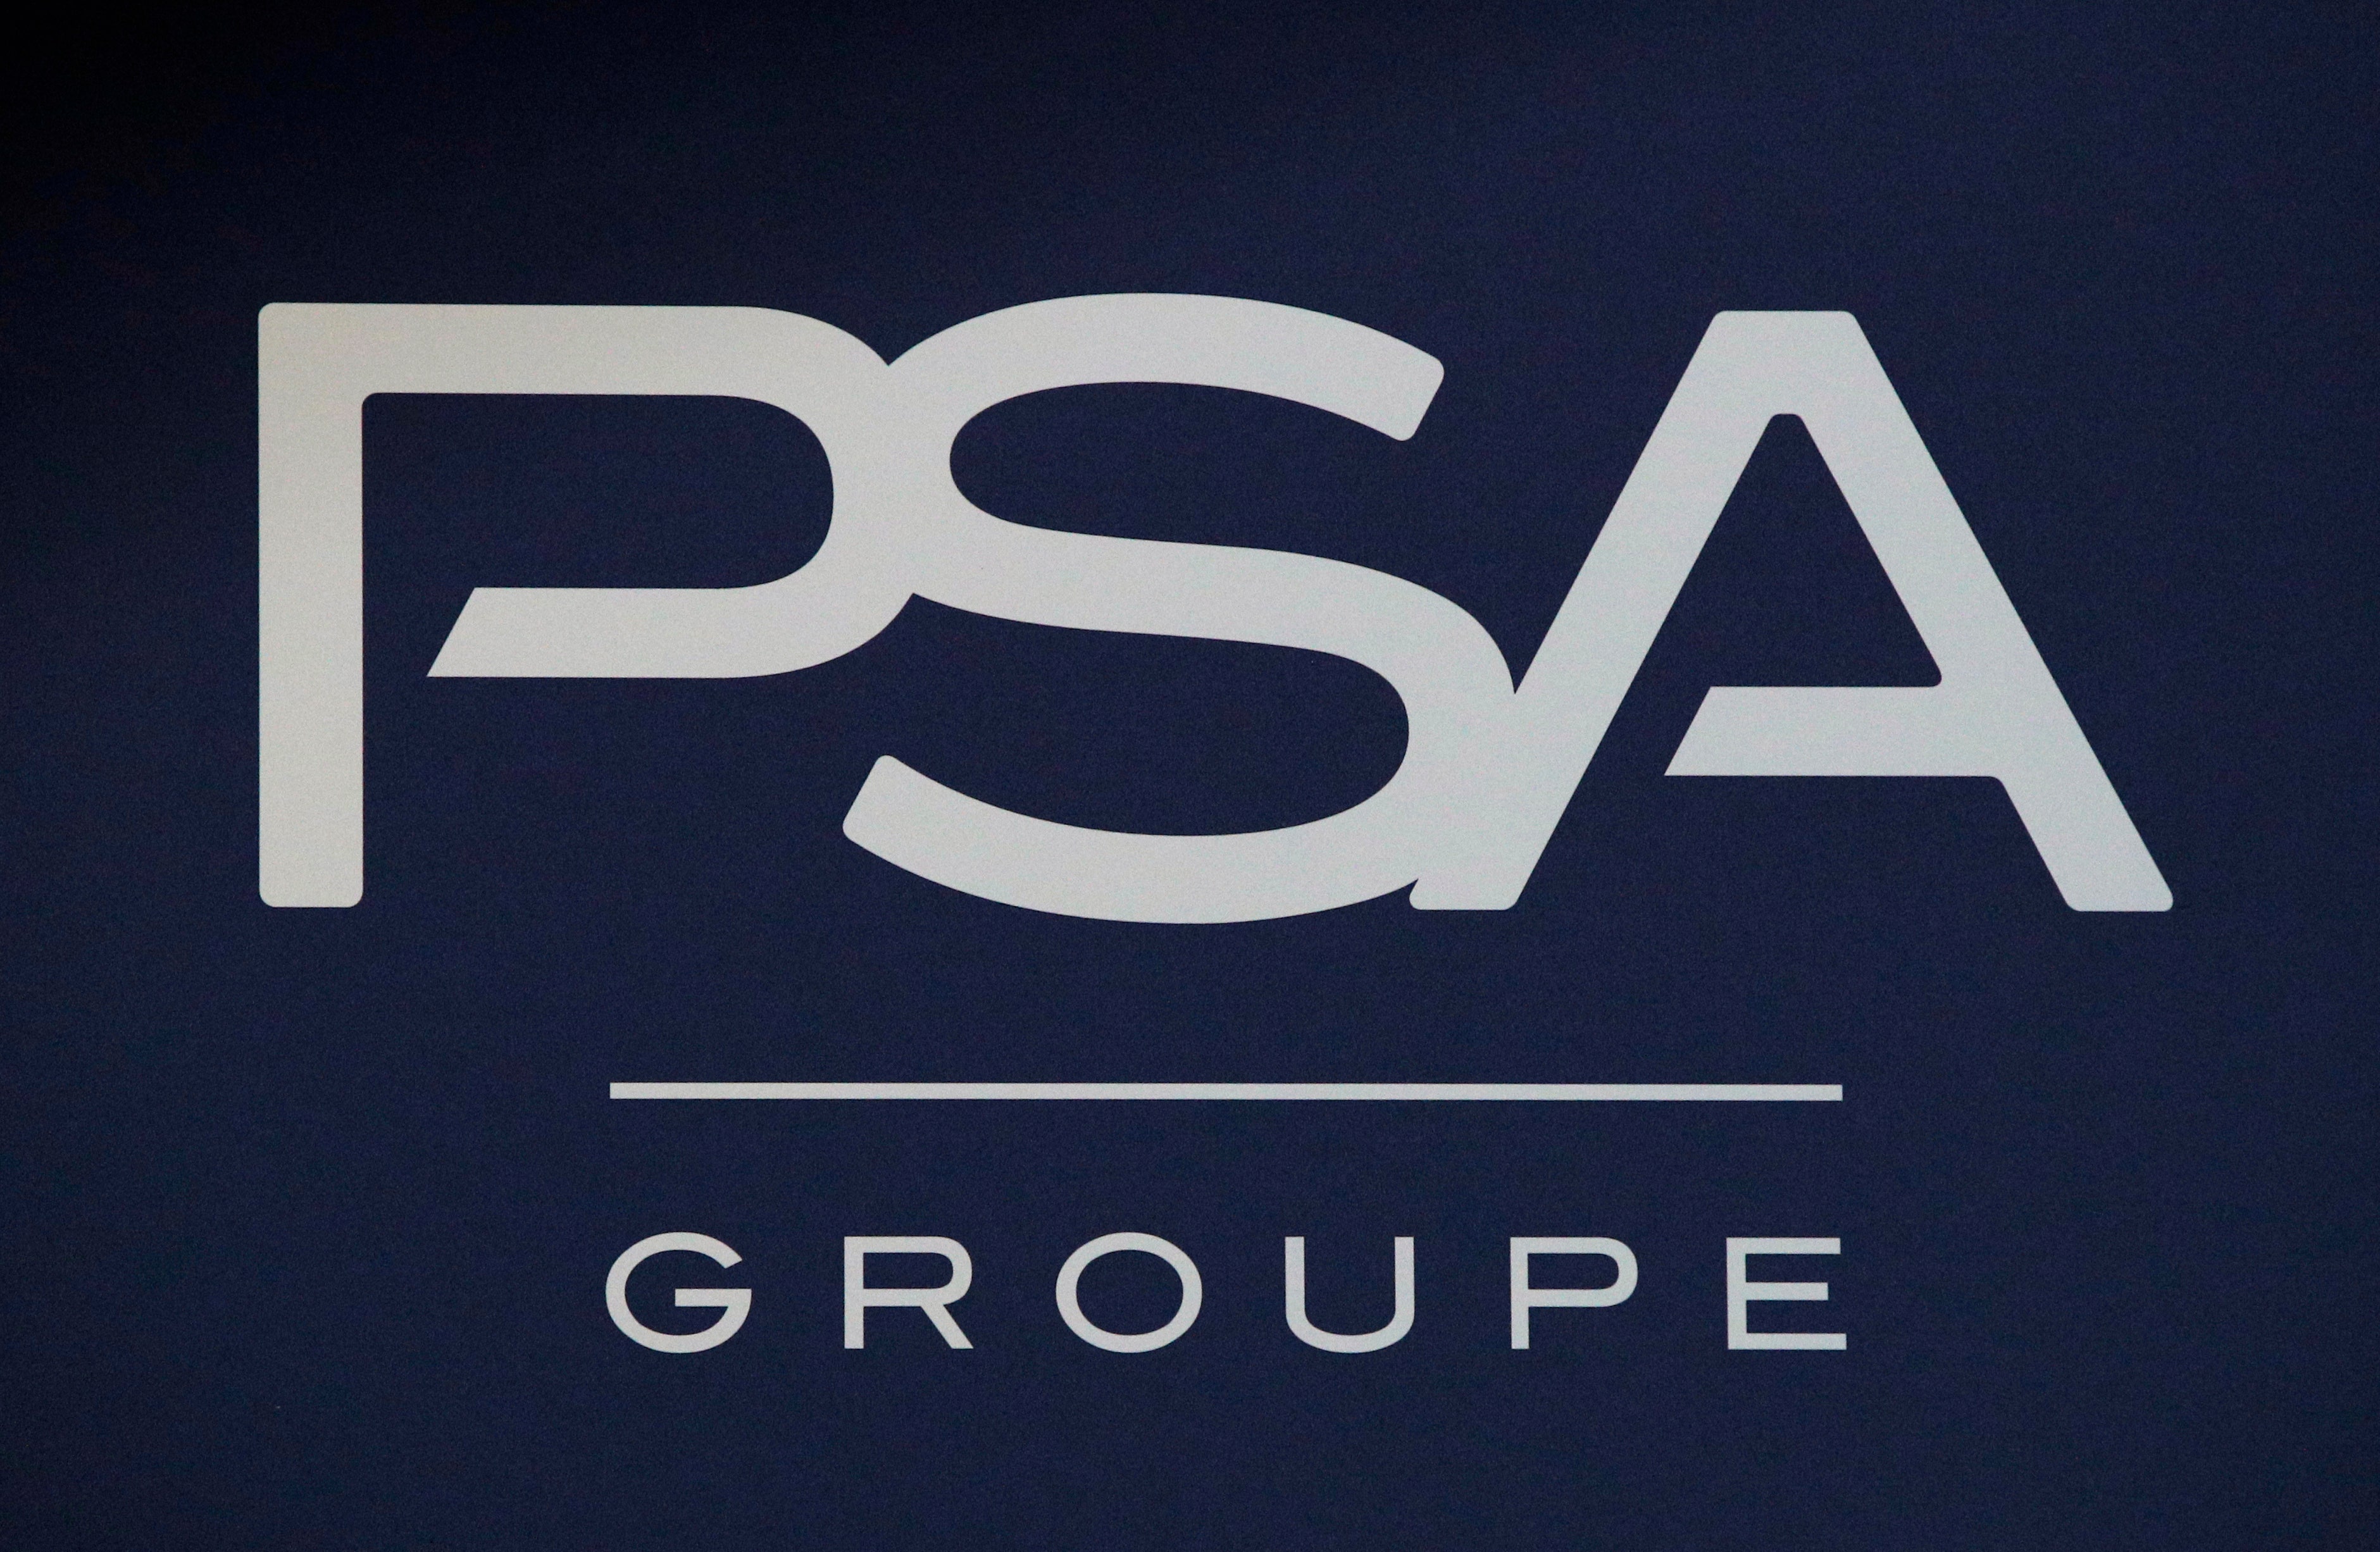 PSA Group shareholders agree to approve merger with Fiat Chrysler